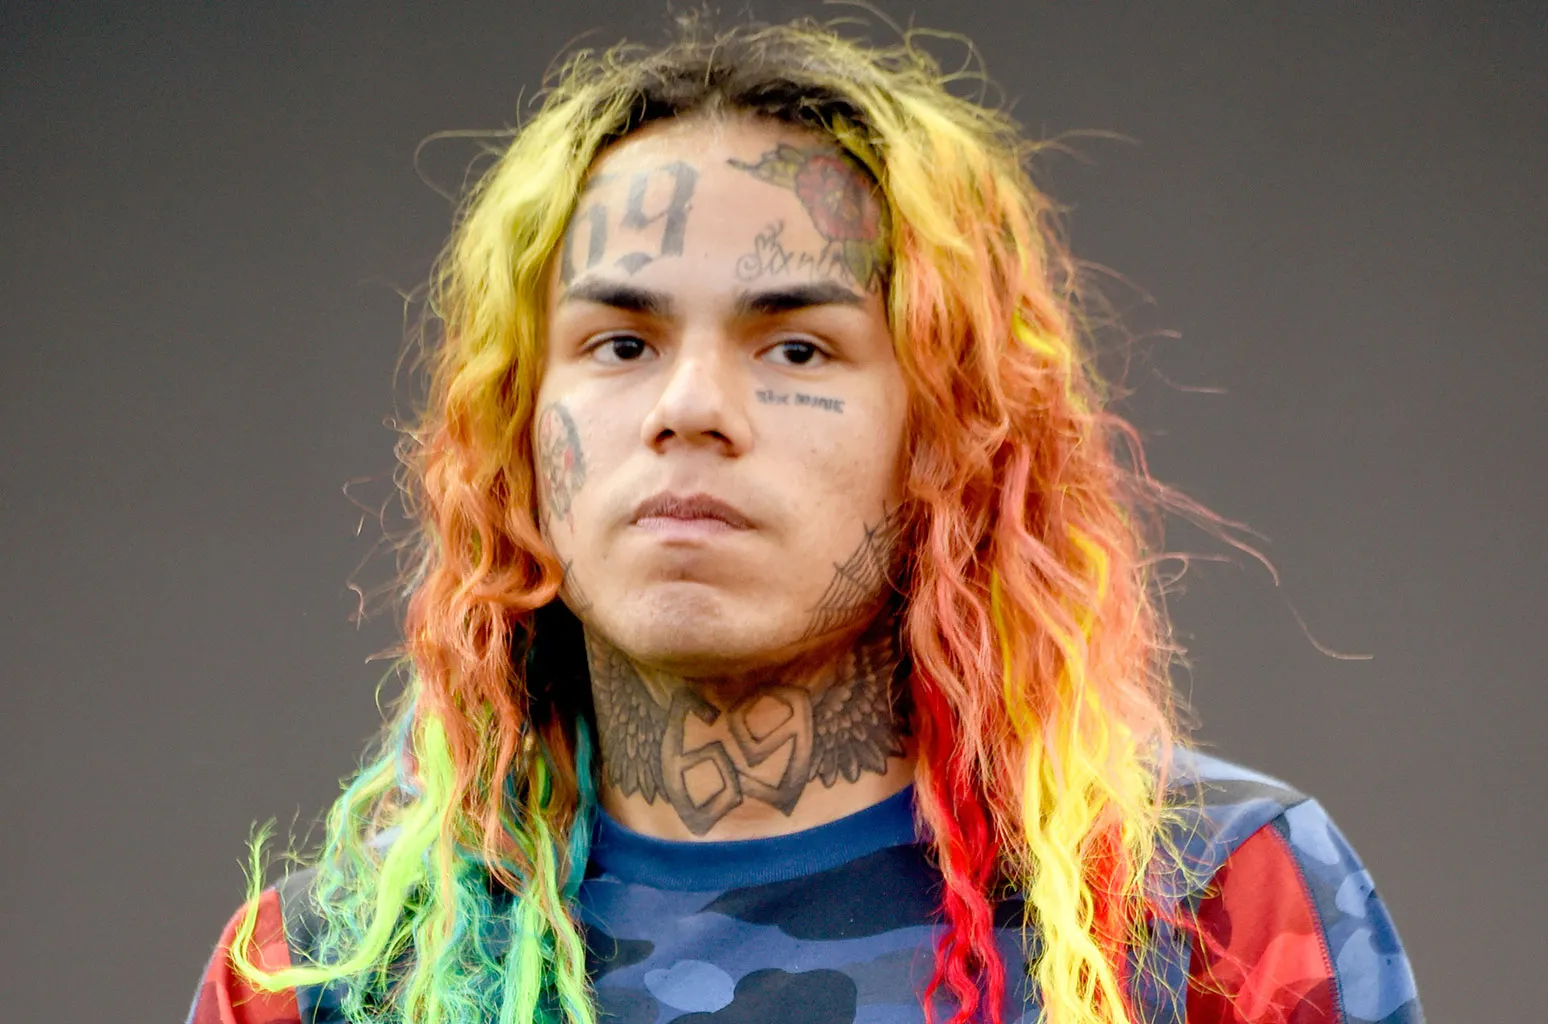 Tekashi 6ix9ine Faces Auction Of Assets To Settle $9.8M Stripper Injury Judgment